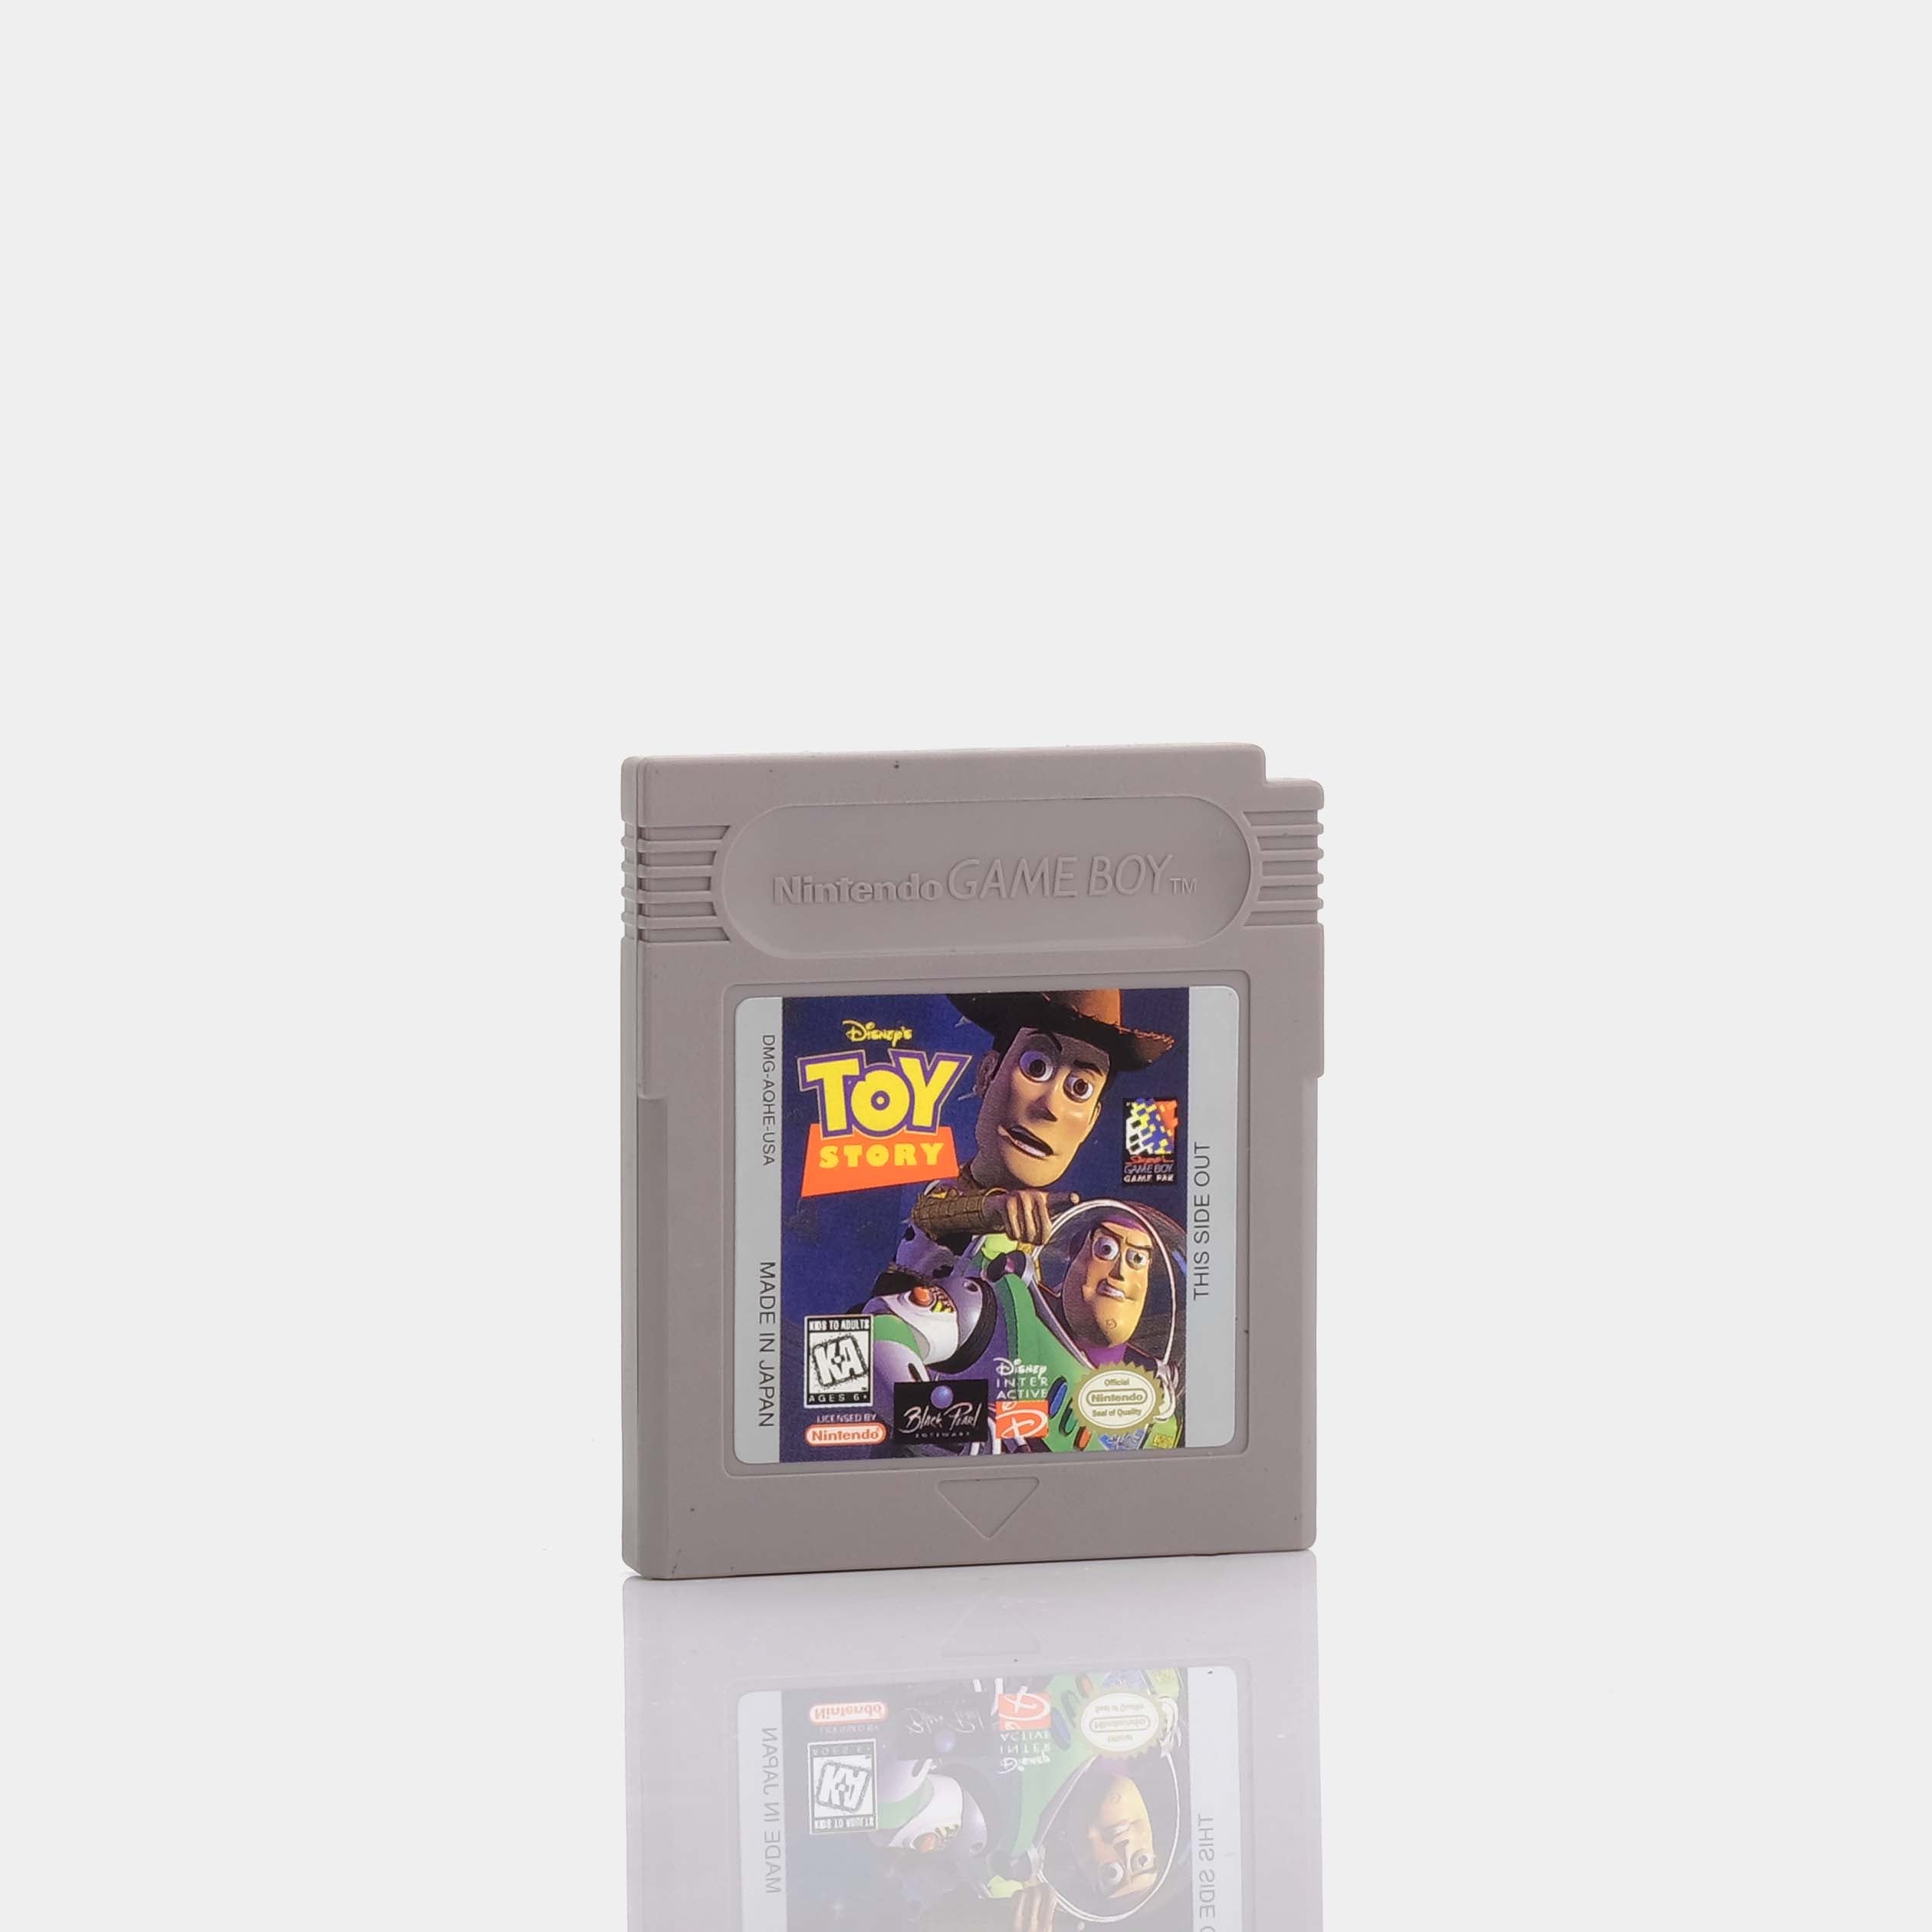 Toy Story Game Boy Game